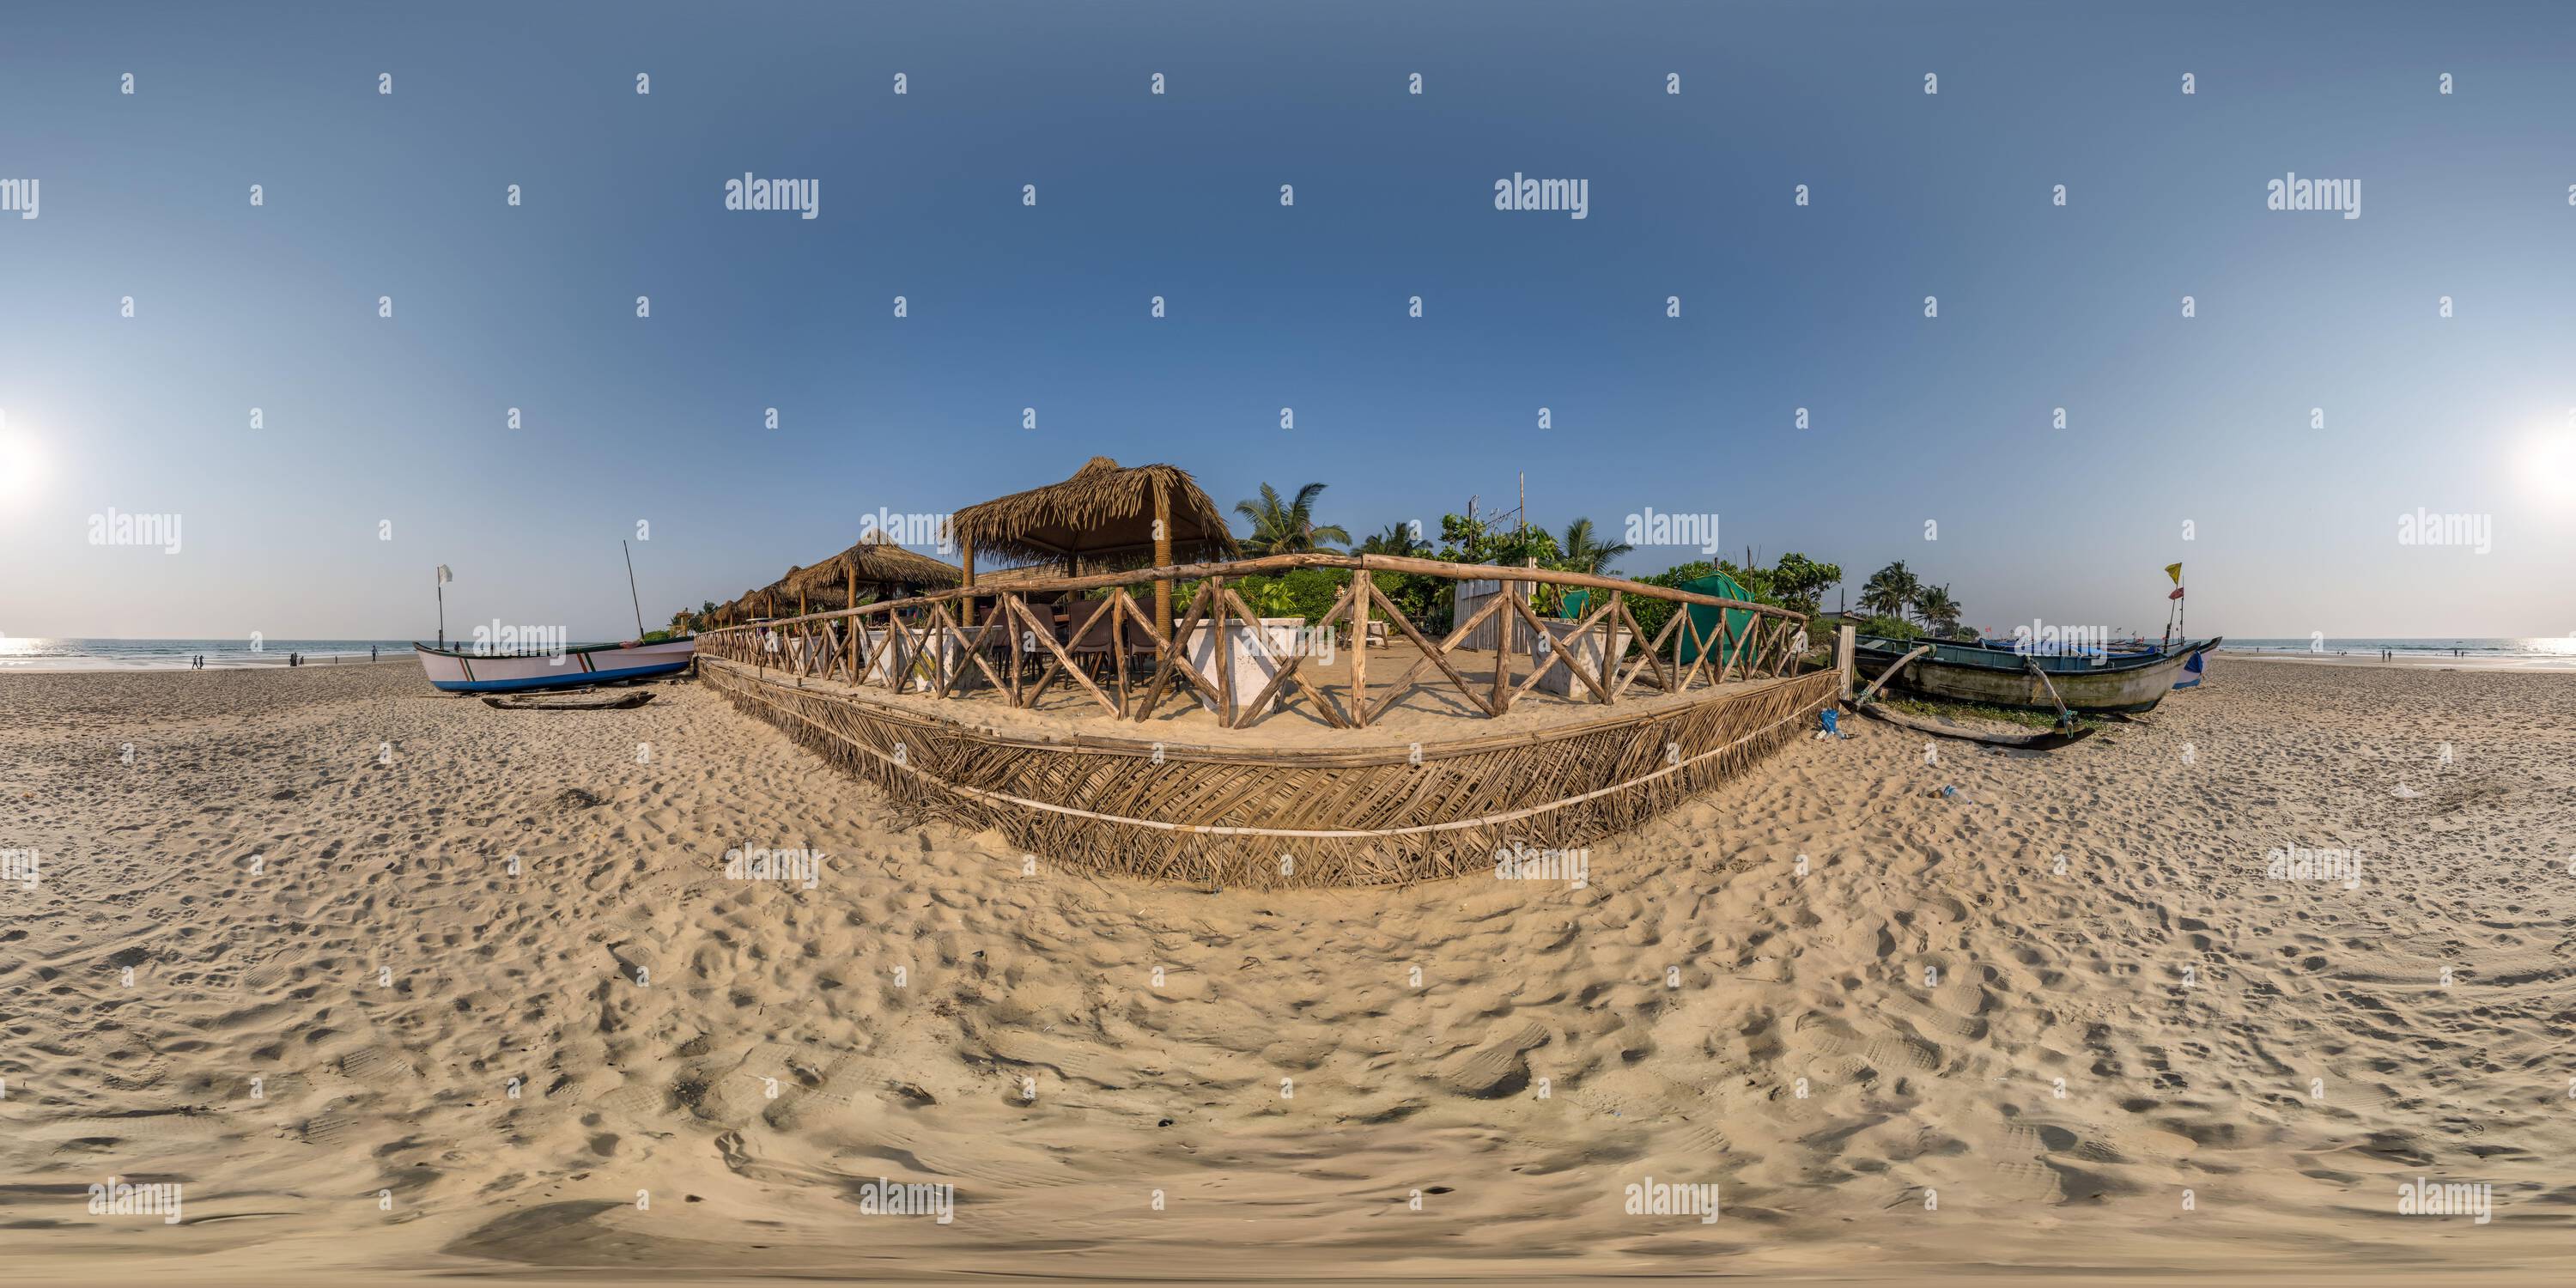 360 degree panoramic view of 360 hdri panorama with coconut trees on ocean coast near tropical shack or open air cafe on beach with fence in equirectangular spherical seamless pro